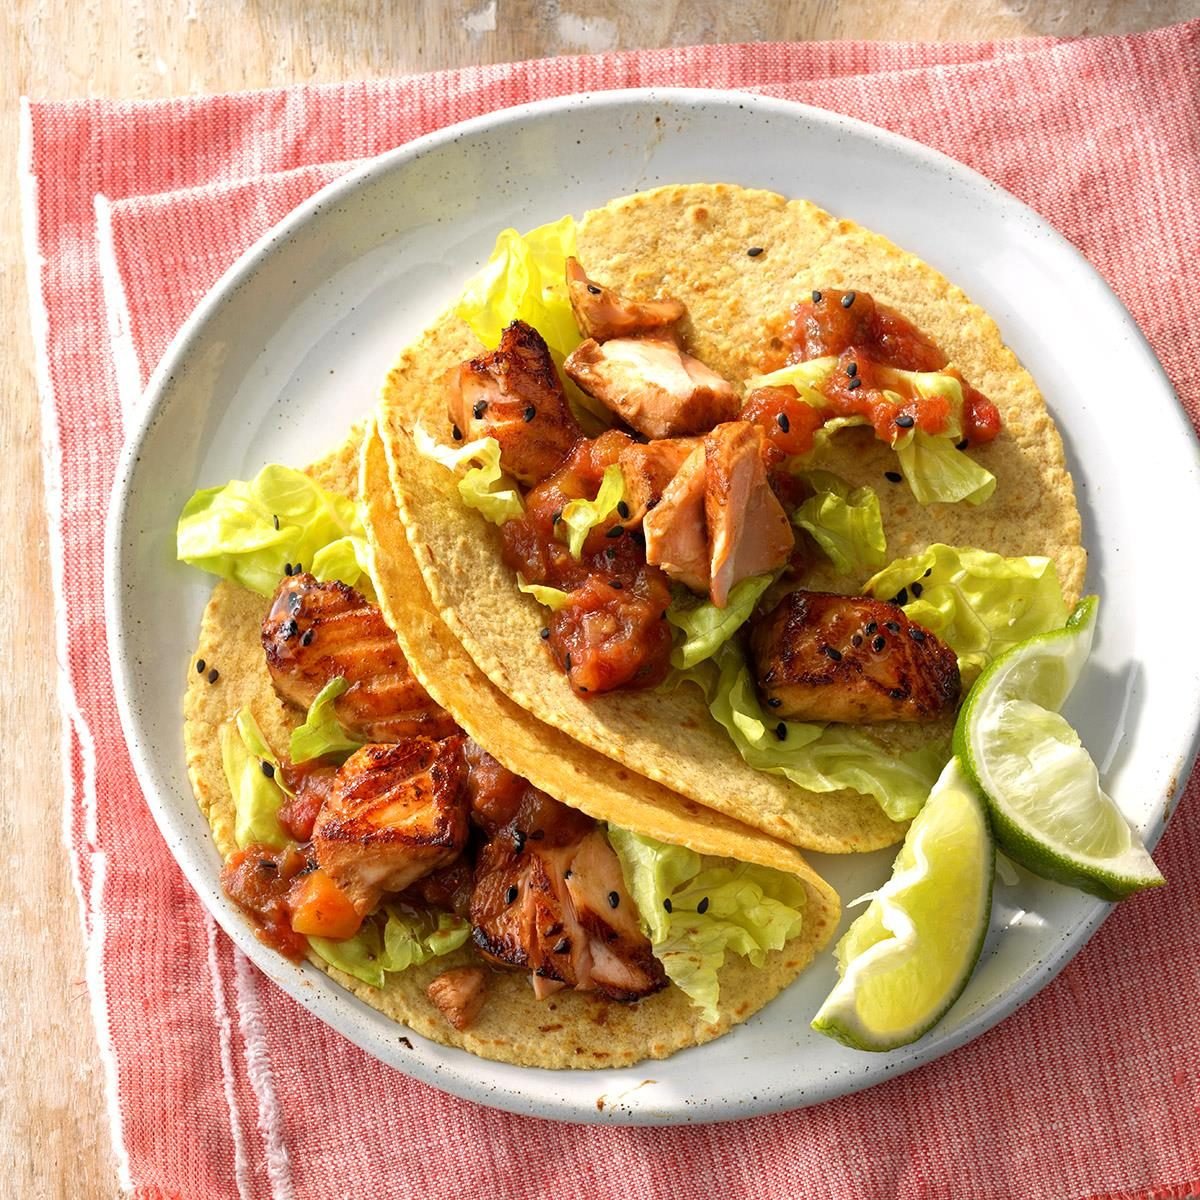 Day 28: Asian Salmon Tacos